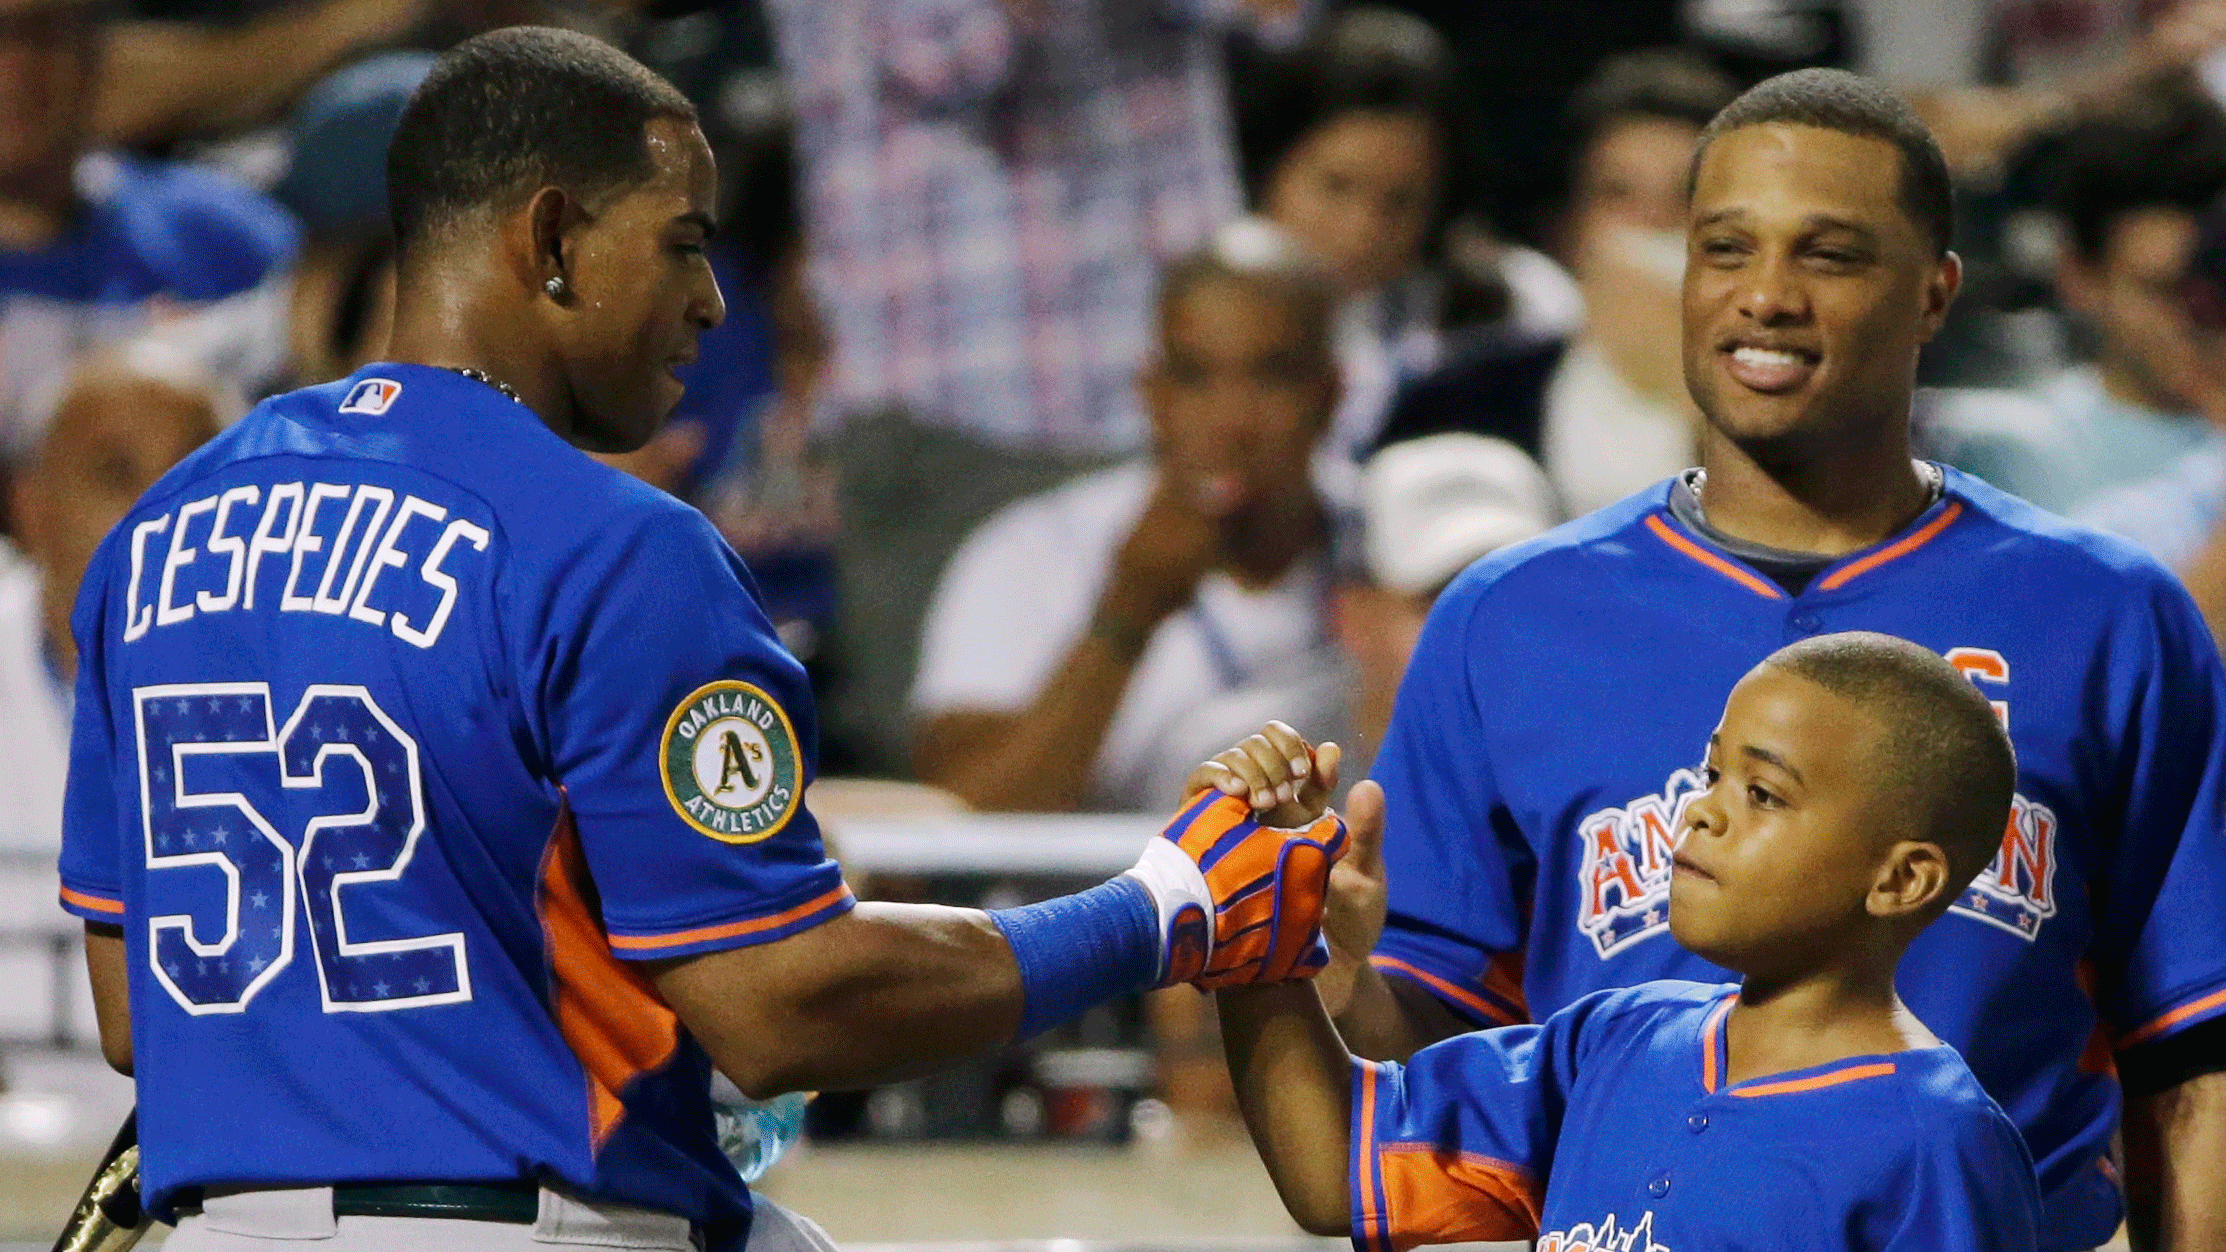 Yoenis Cespedes is greeted by a child and Robinson Cano. (AP/Matt Slocum)